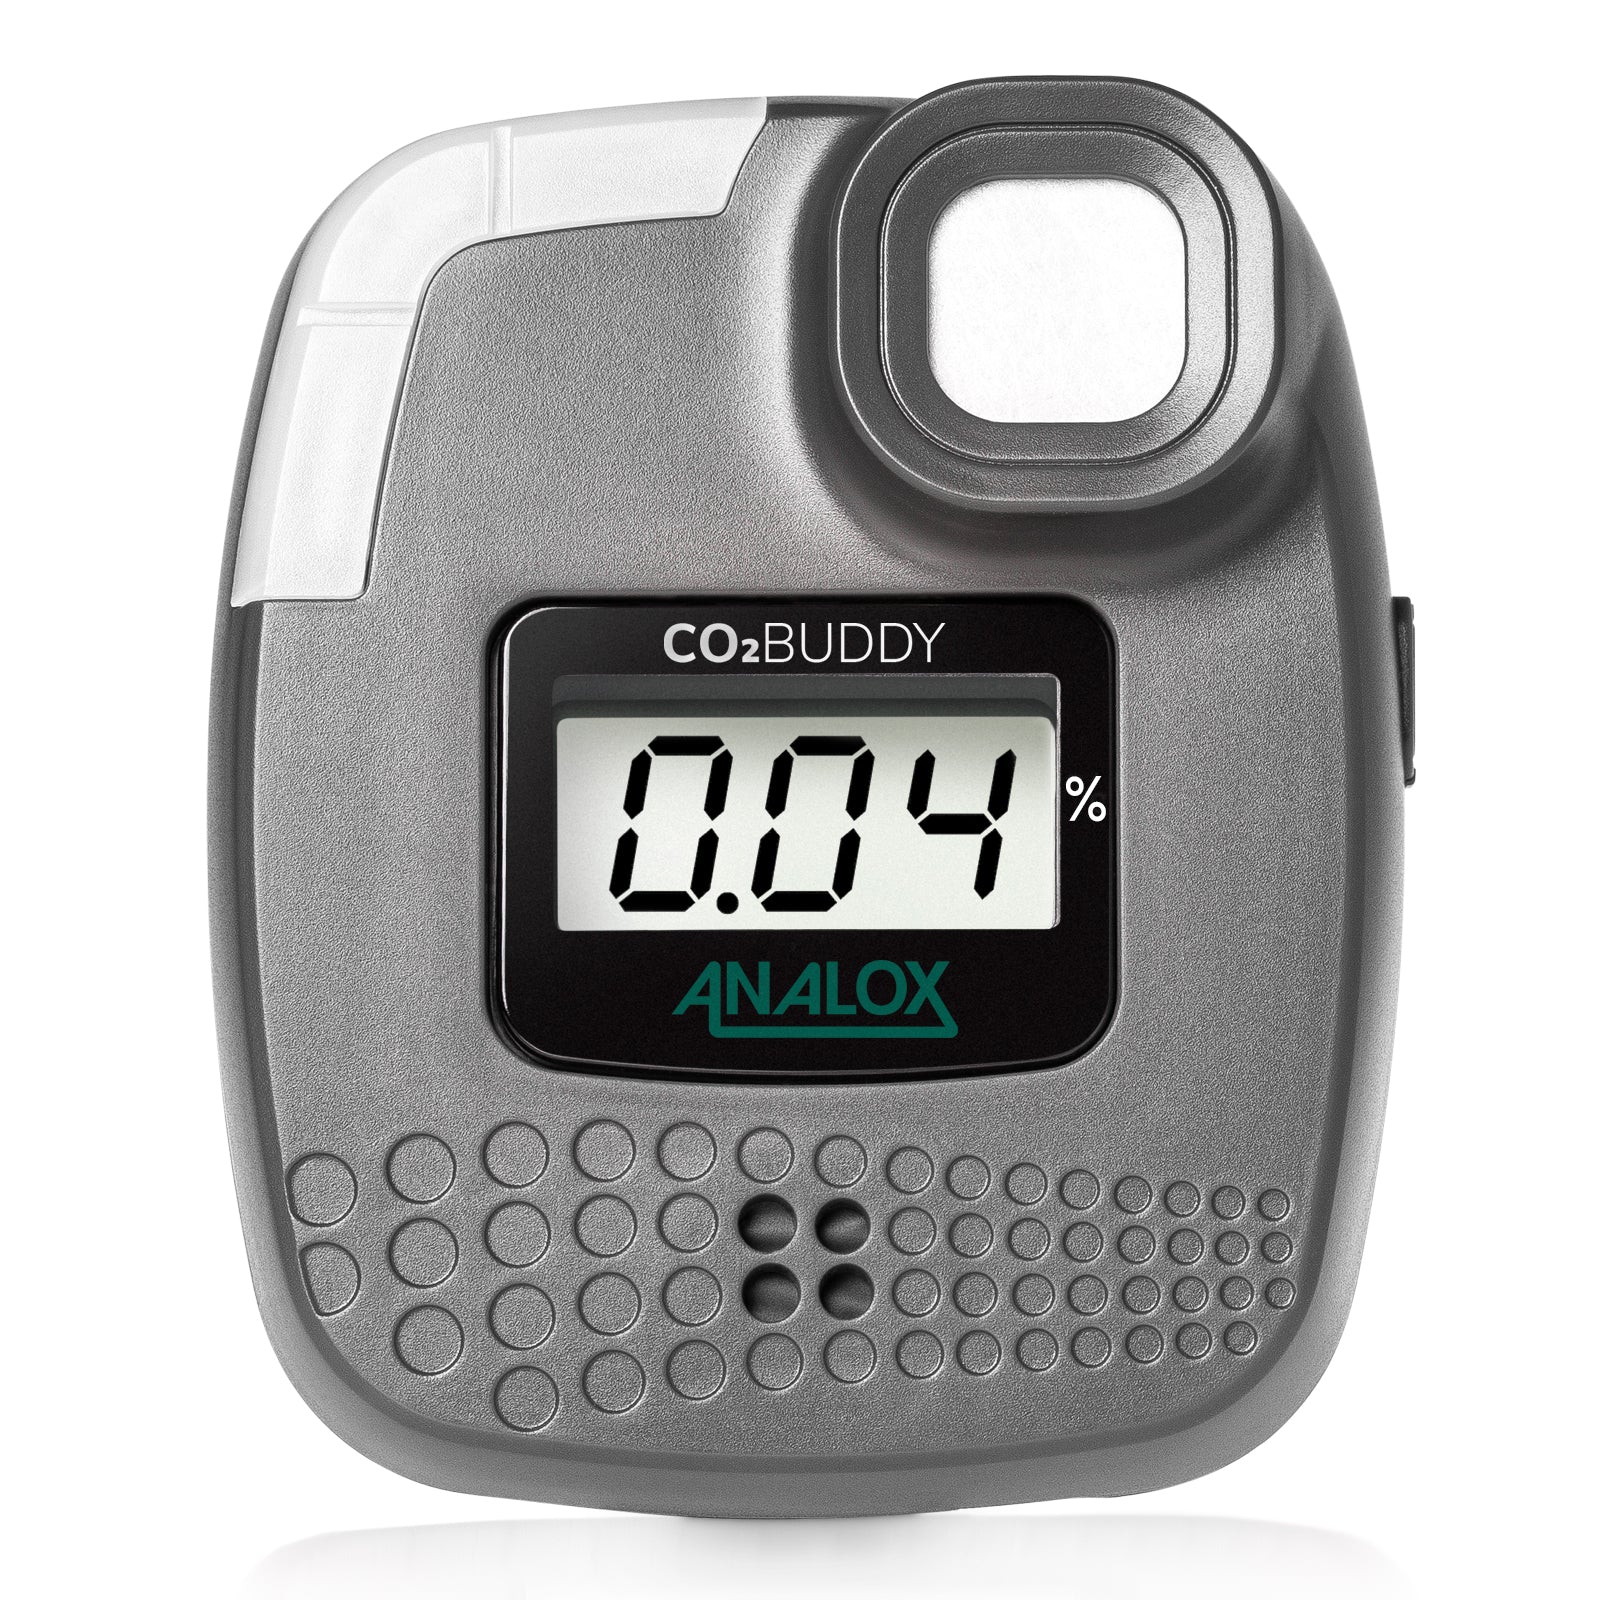 The CO2BUDDY by Analox, a portable carbon dioxide (CO2) unit that sets off an alarm, vibration and strobe when a dangerous level of carbon dioxide (CO2) is detected